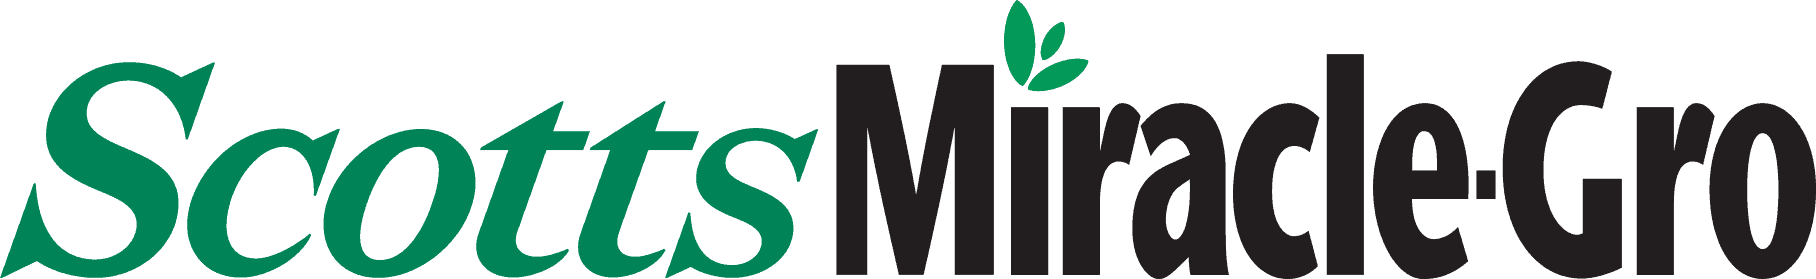 Scotts Miracle-Gro Logo Color